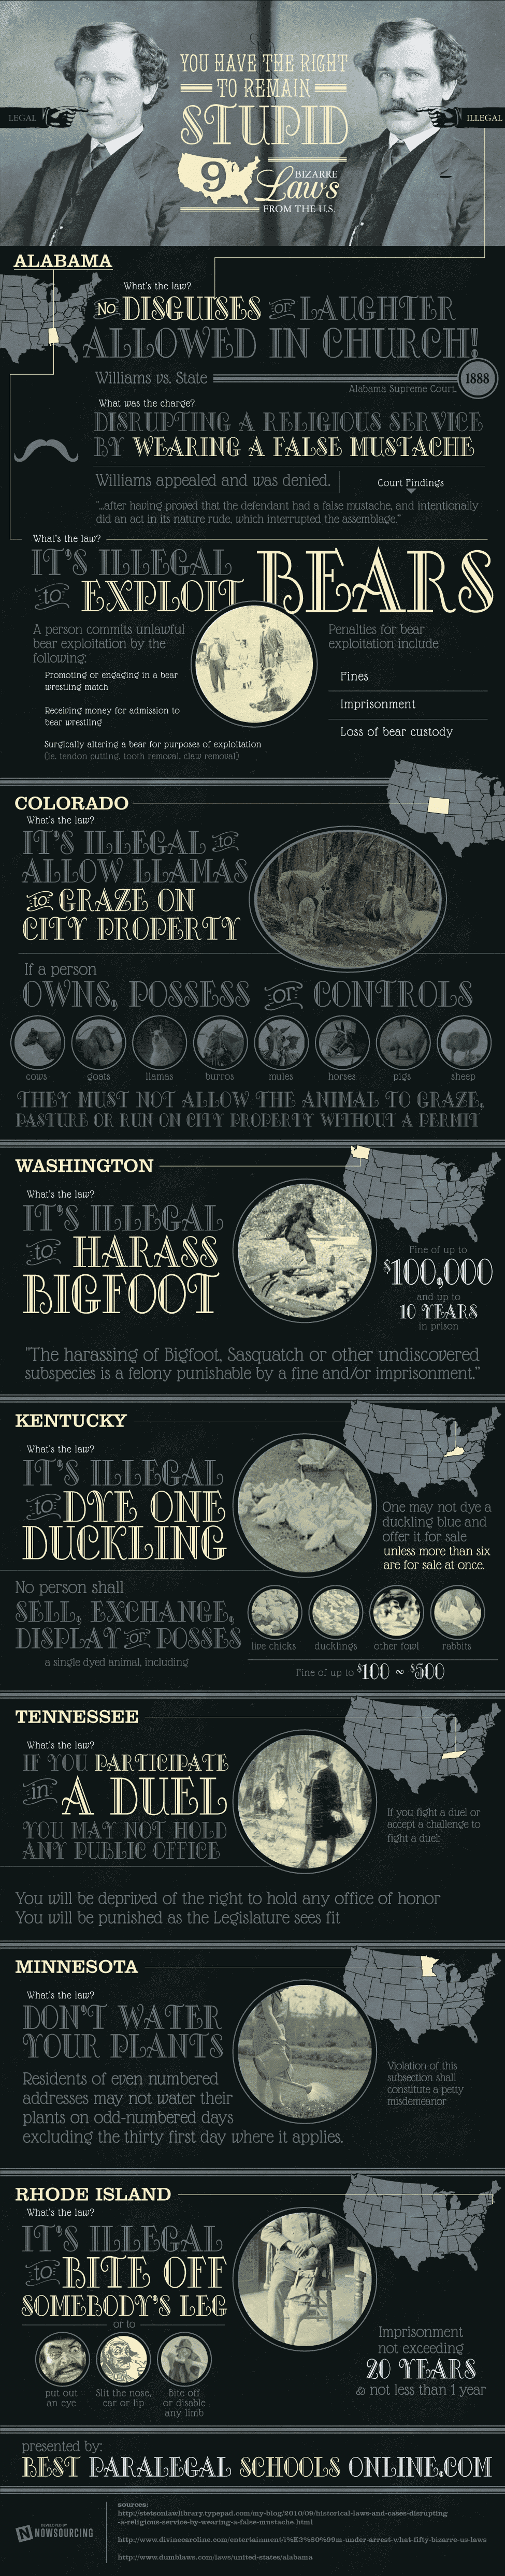 9 Bizarre Laws In American History [Infographic]